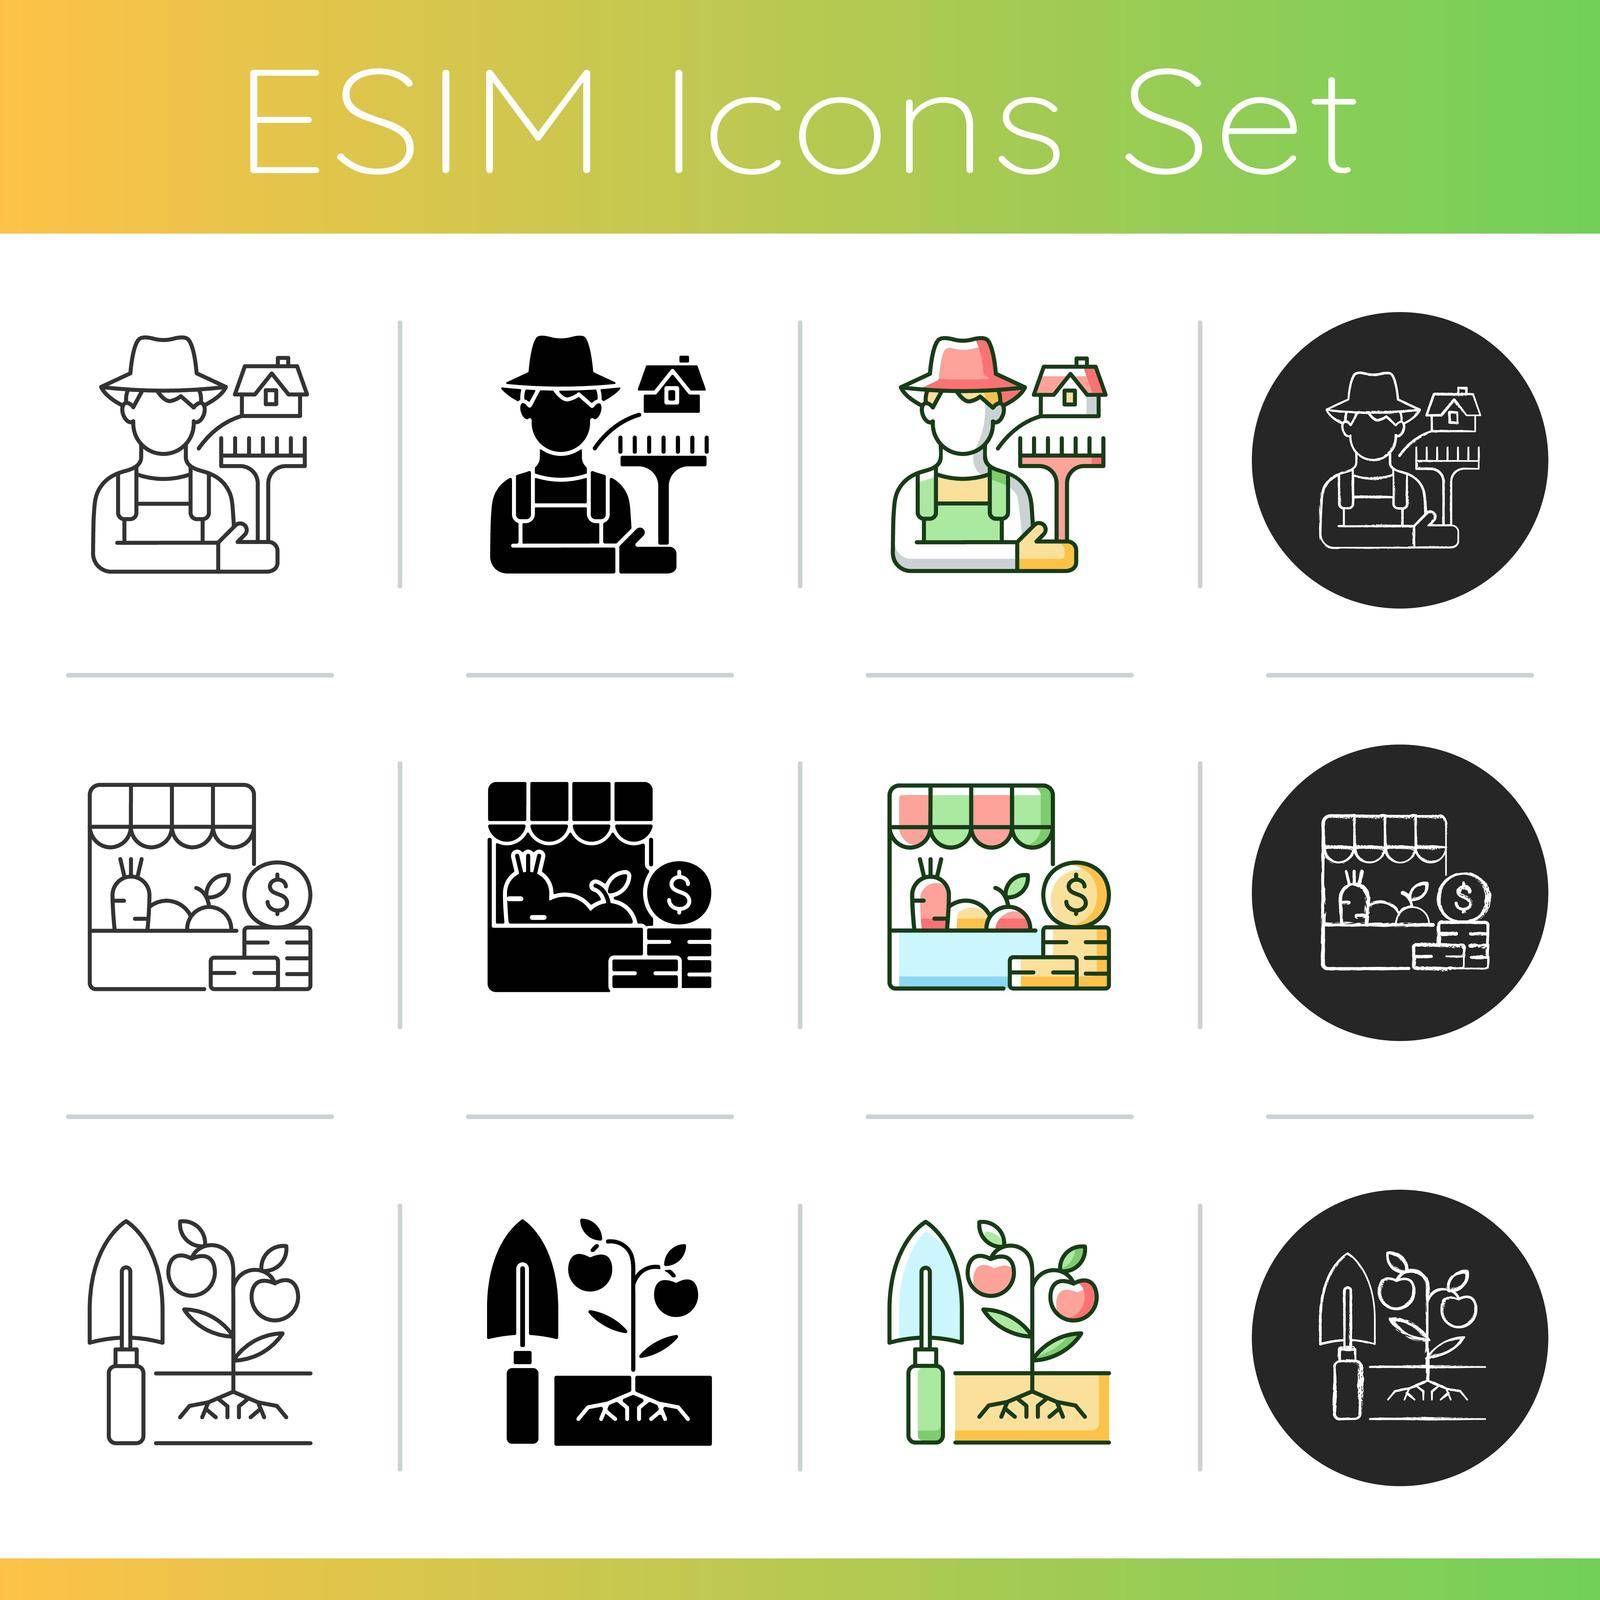 Farming icons set. Agricultural business. Rural area. Crop quality control. Cultivation and plant care. Organic products. Linear, black and RGB color styles. Isolated vector illustrations